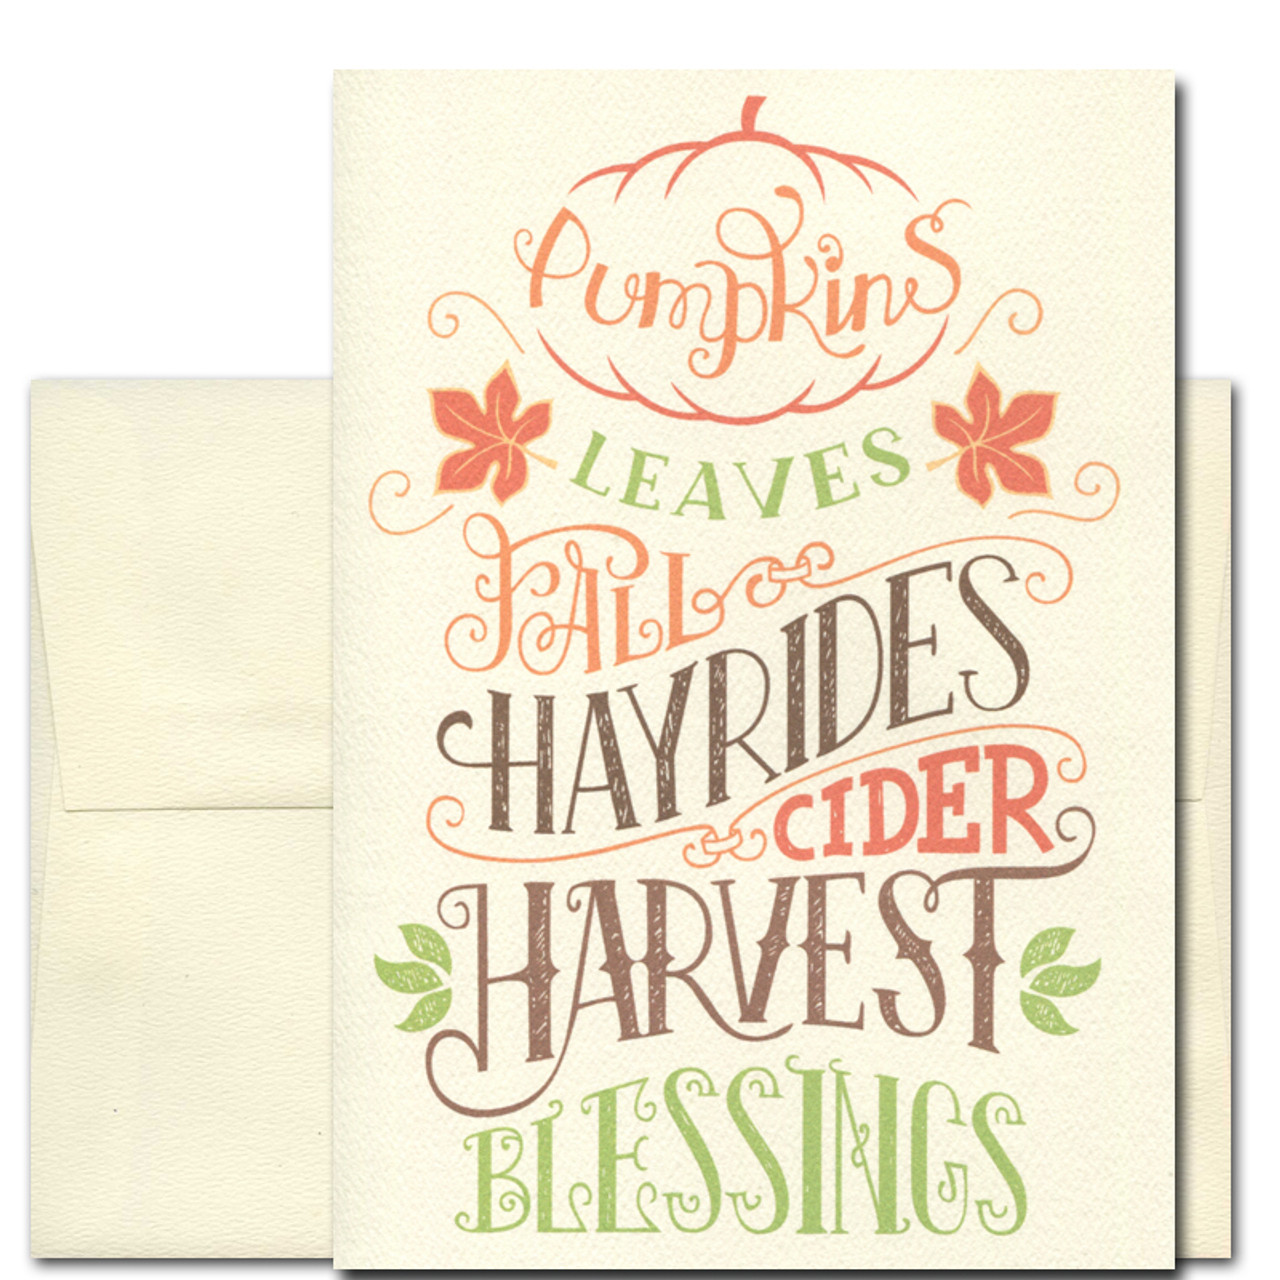 Fall Days card cover has hand-lettered wording: pumpkins, leaves, fall, hayrides, harvest, blessings